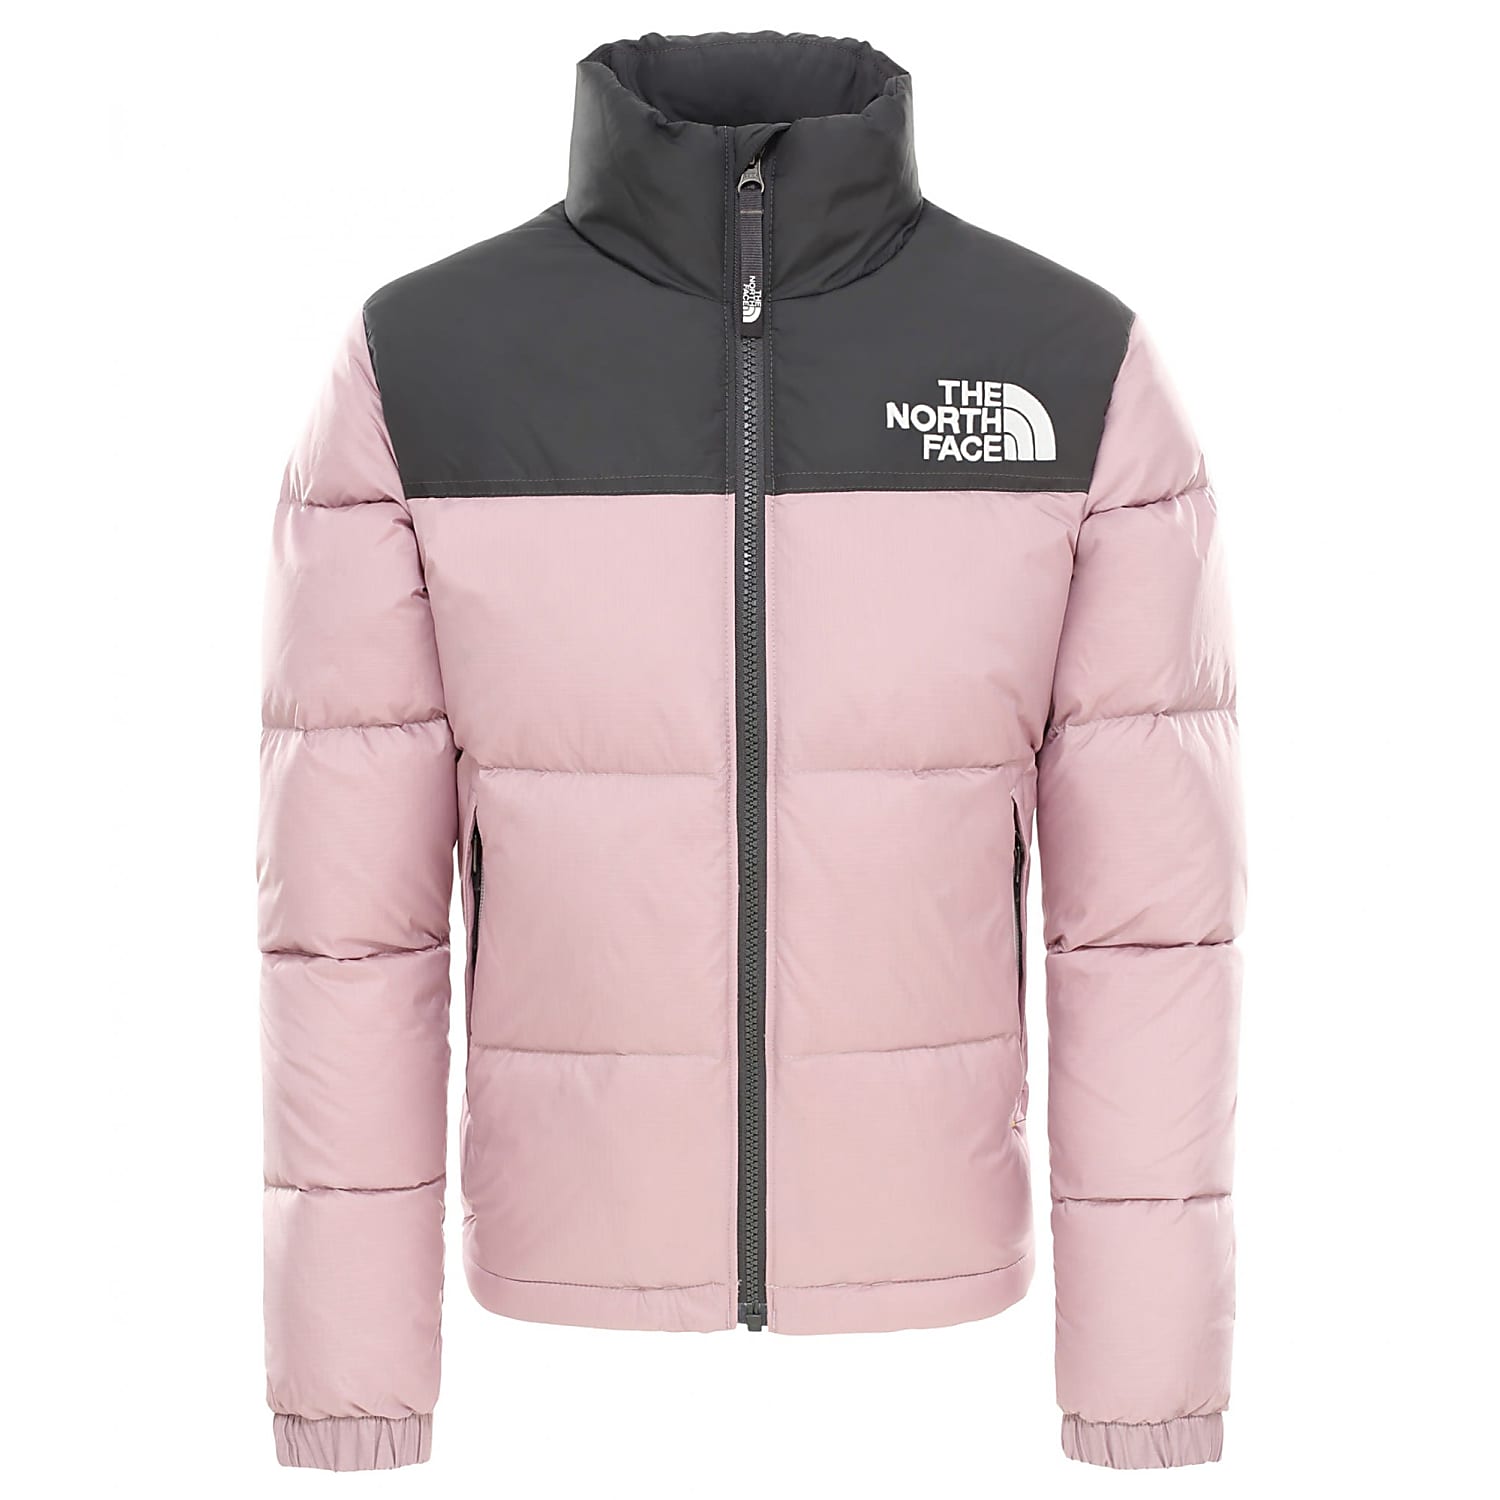 the north face youth jacket sale